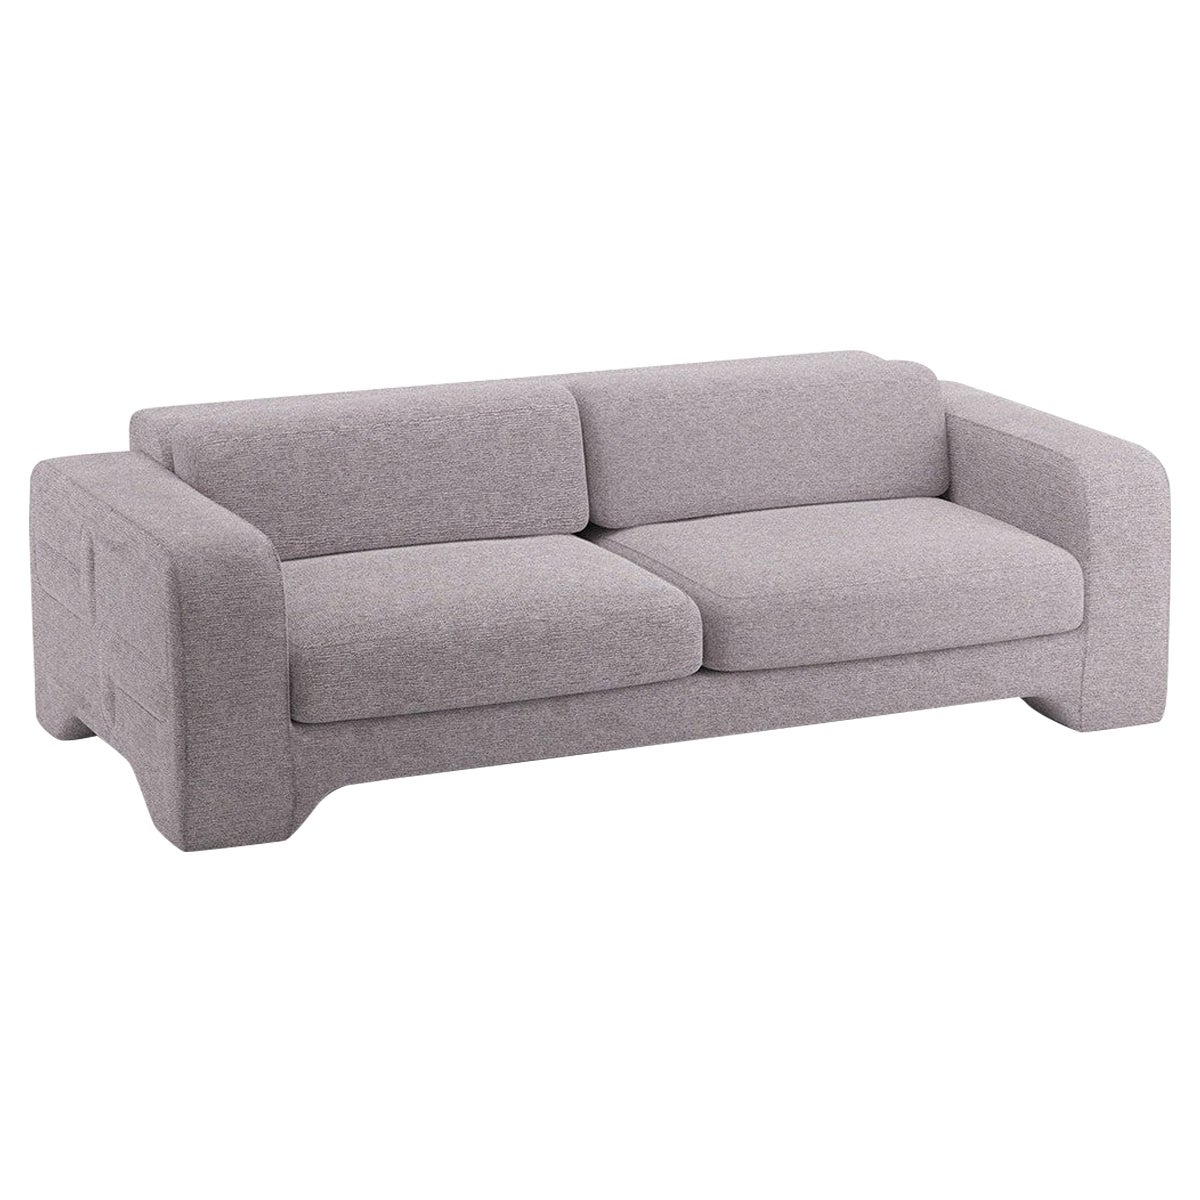 Popus Editions Giovanna 2.5 Seater Sofa in Mouse Megeve Fabric with Knit Effect For Sale